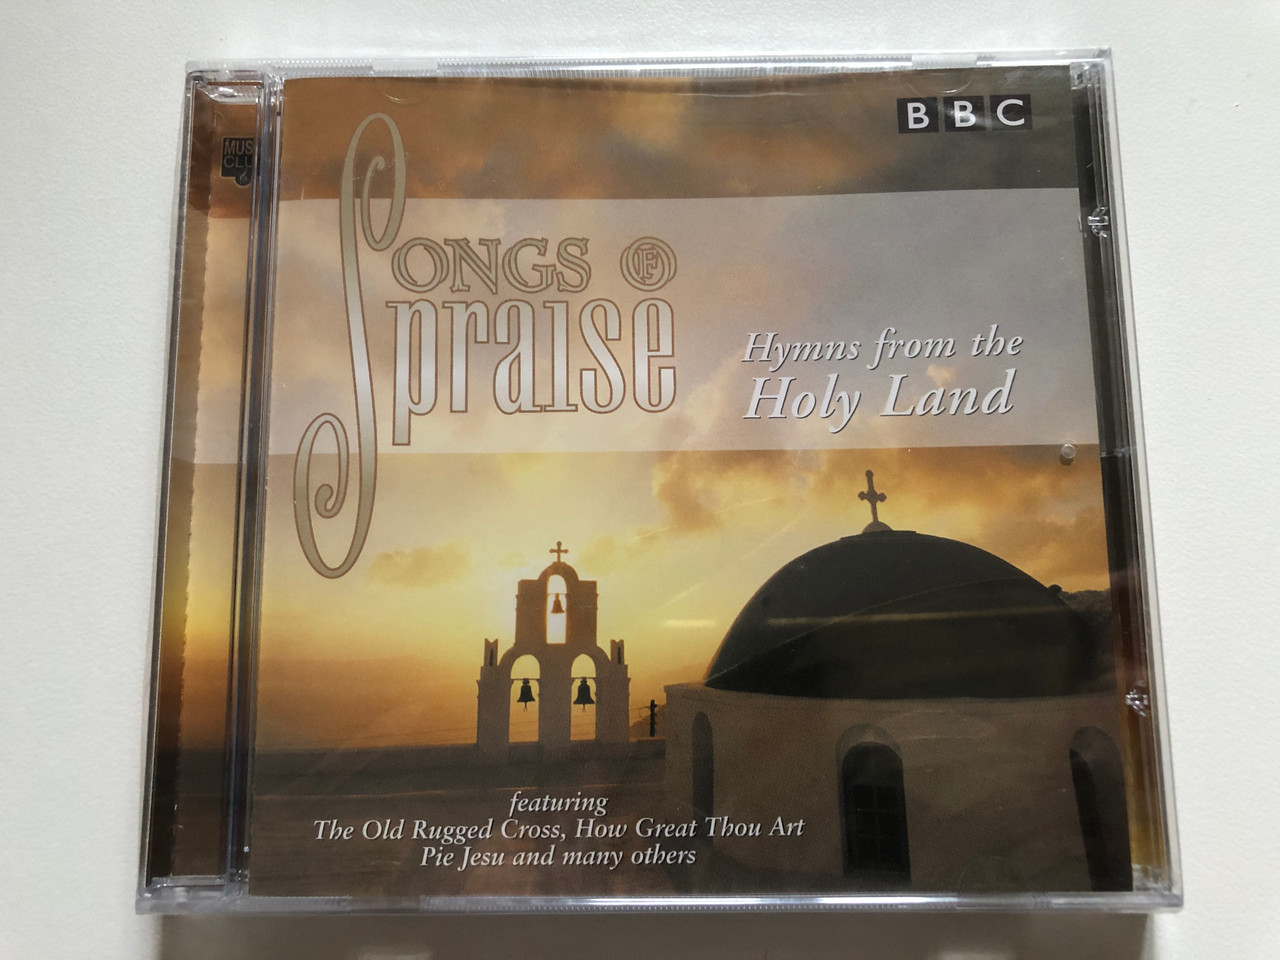 https://cdn10.bigcommerce.com/s-62bdpkt7pb/products/0/images/311144/Songs_of_Praise_Hymns_from_the_Holy_Land_-_Featuring_The_Old_Rugged_Cross_How_Great_Thou_Art_Pie_Jesu_and_many_others_BBC_Music_Audio_CD_2002_MCCD_448_1__51987.1699518576.1280.1280.JPG?c=2